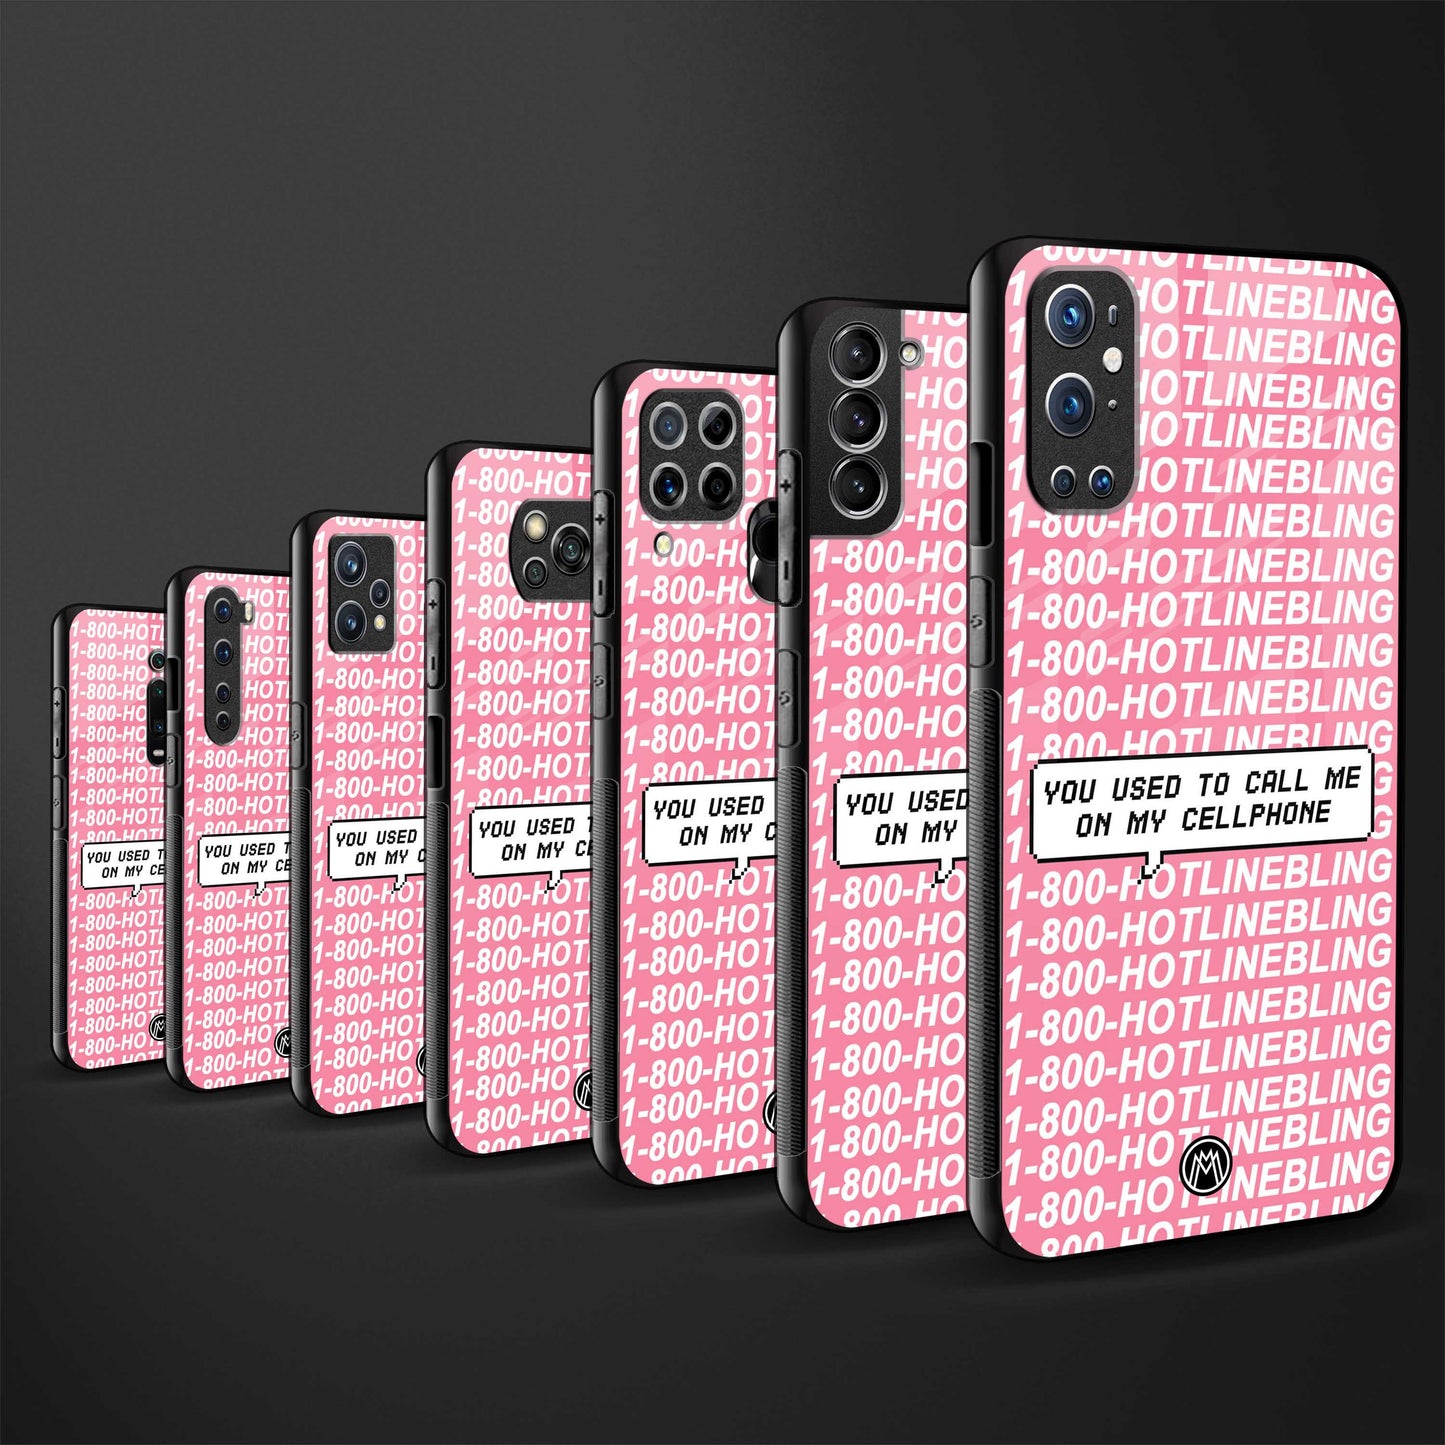 1800 hotline bling phone cover for redmi 7redmi y3 